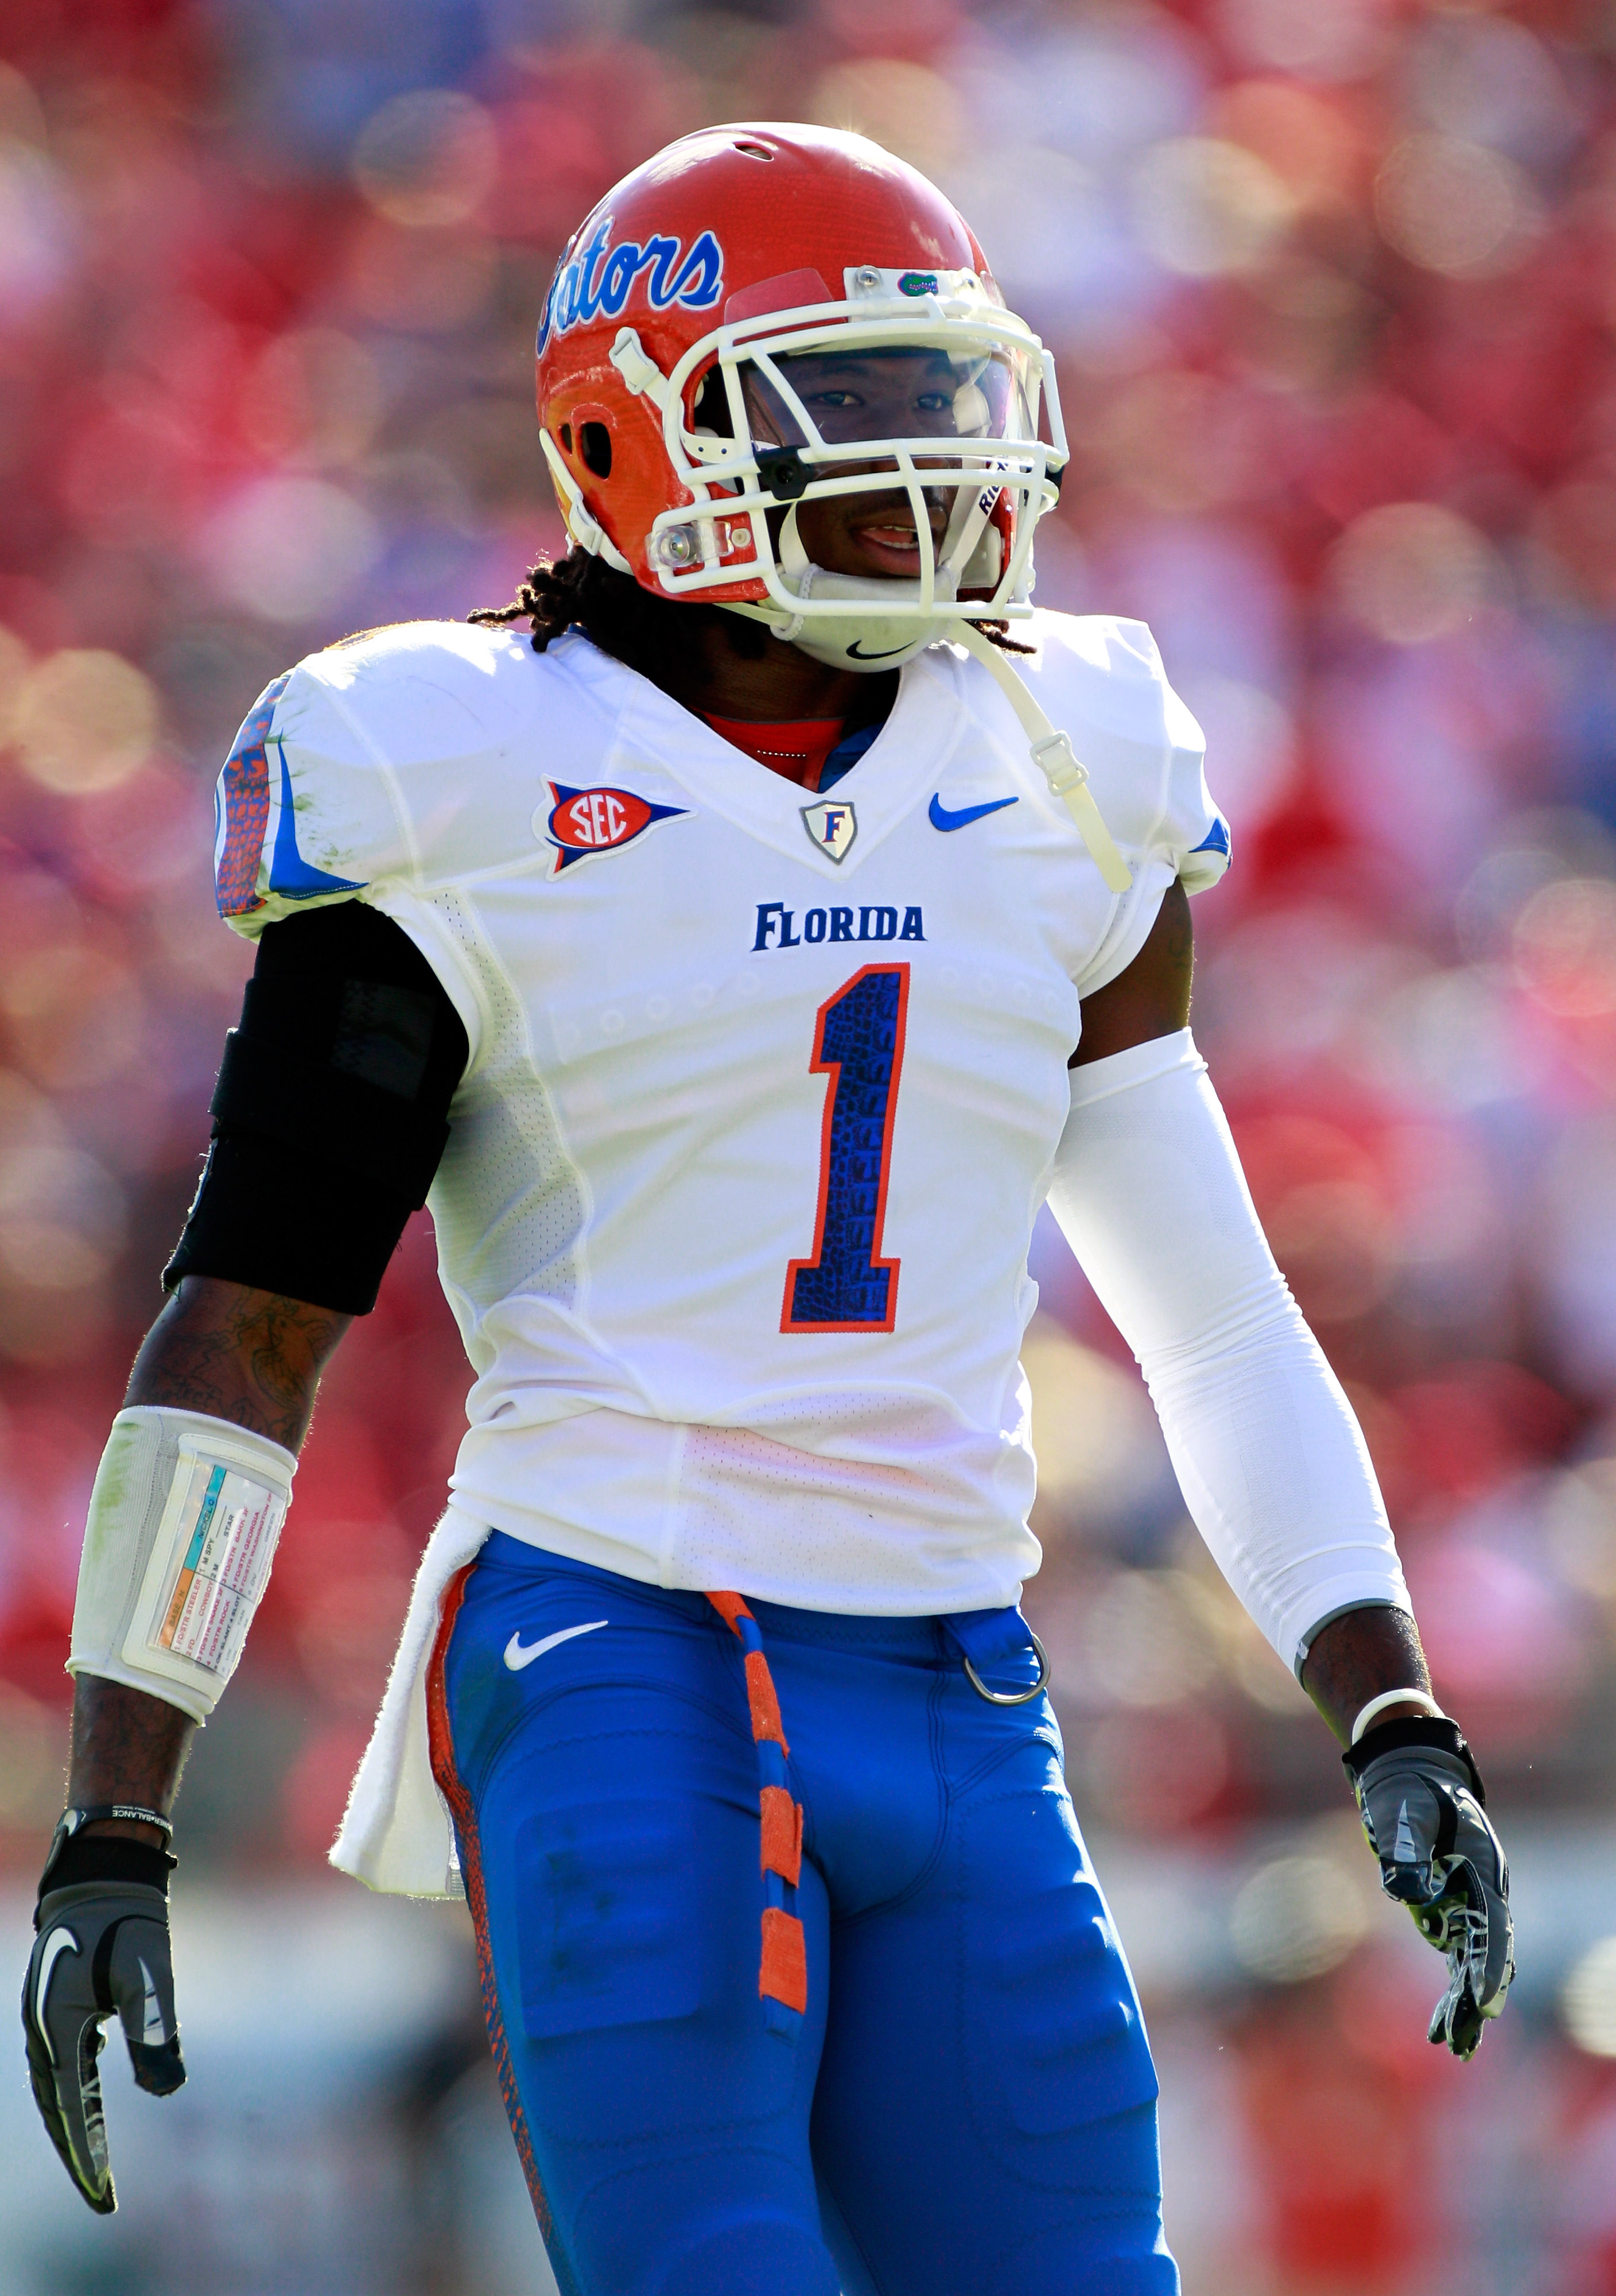 JACKSONVILLE, FL - OCTOBER 30:  Janoris Jenkins #1 of the Florida Gators looks over the offense during the game against the Georgia Bulldogs at EverBank Field on October 30, 2010 in Jacksonville, Florida.  (Photo by Sam Greenwood/Getty Images)